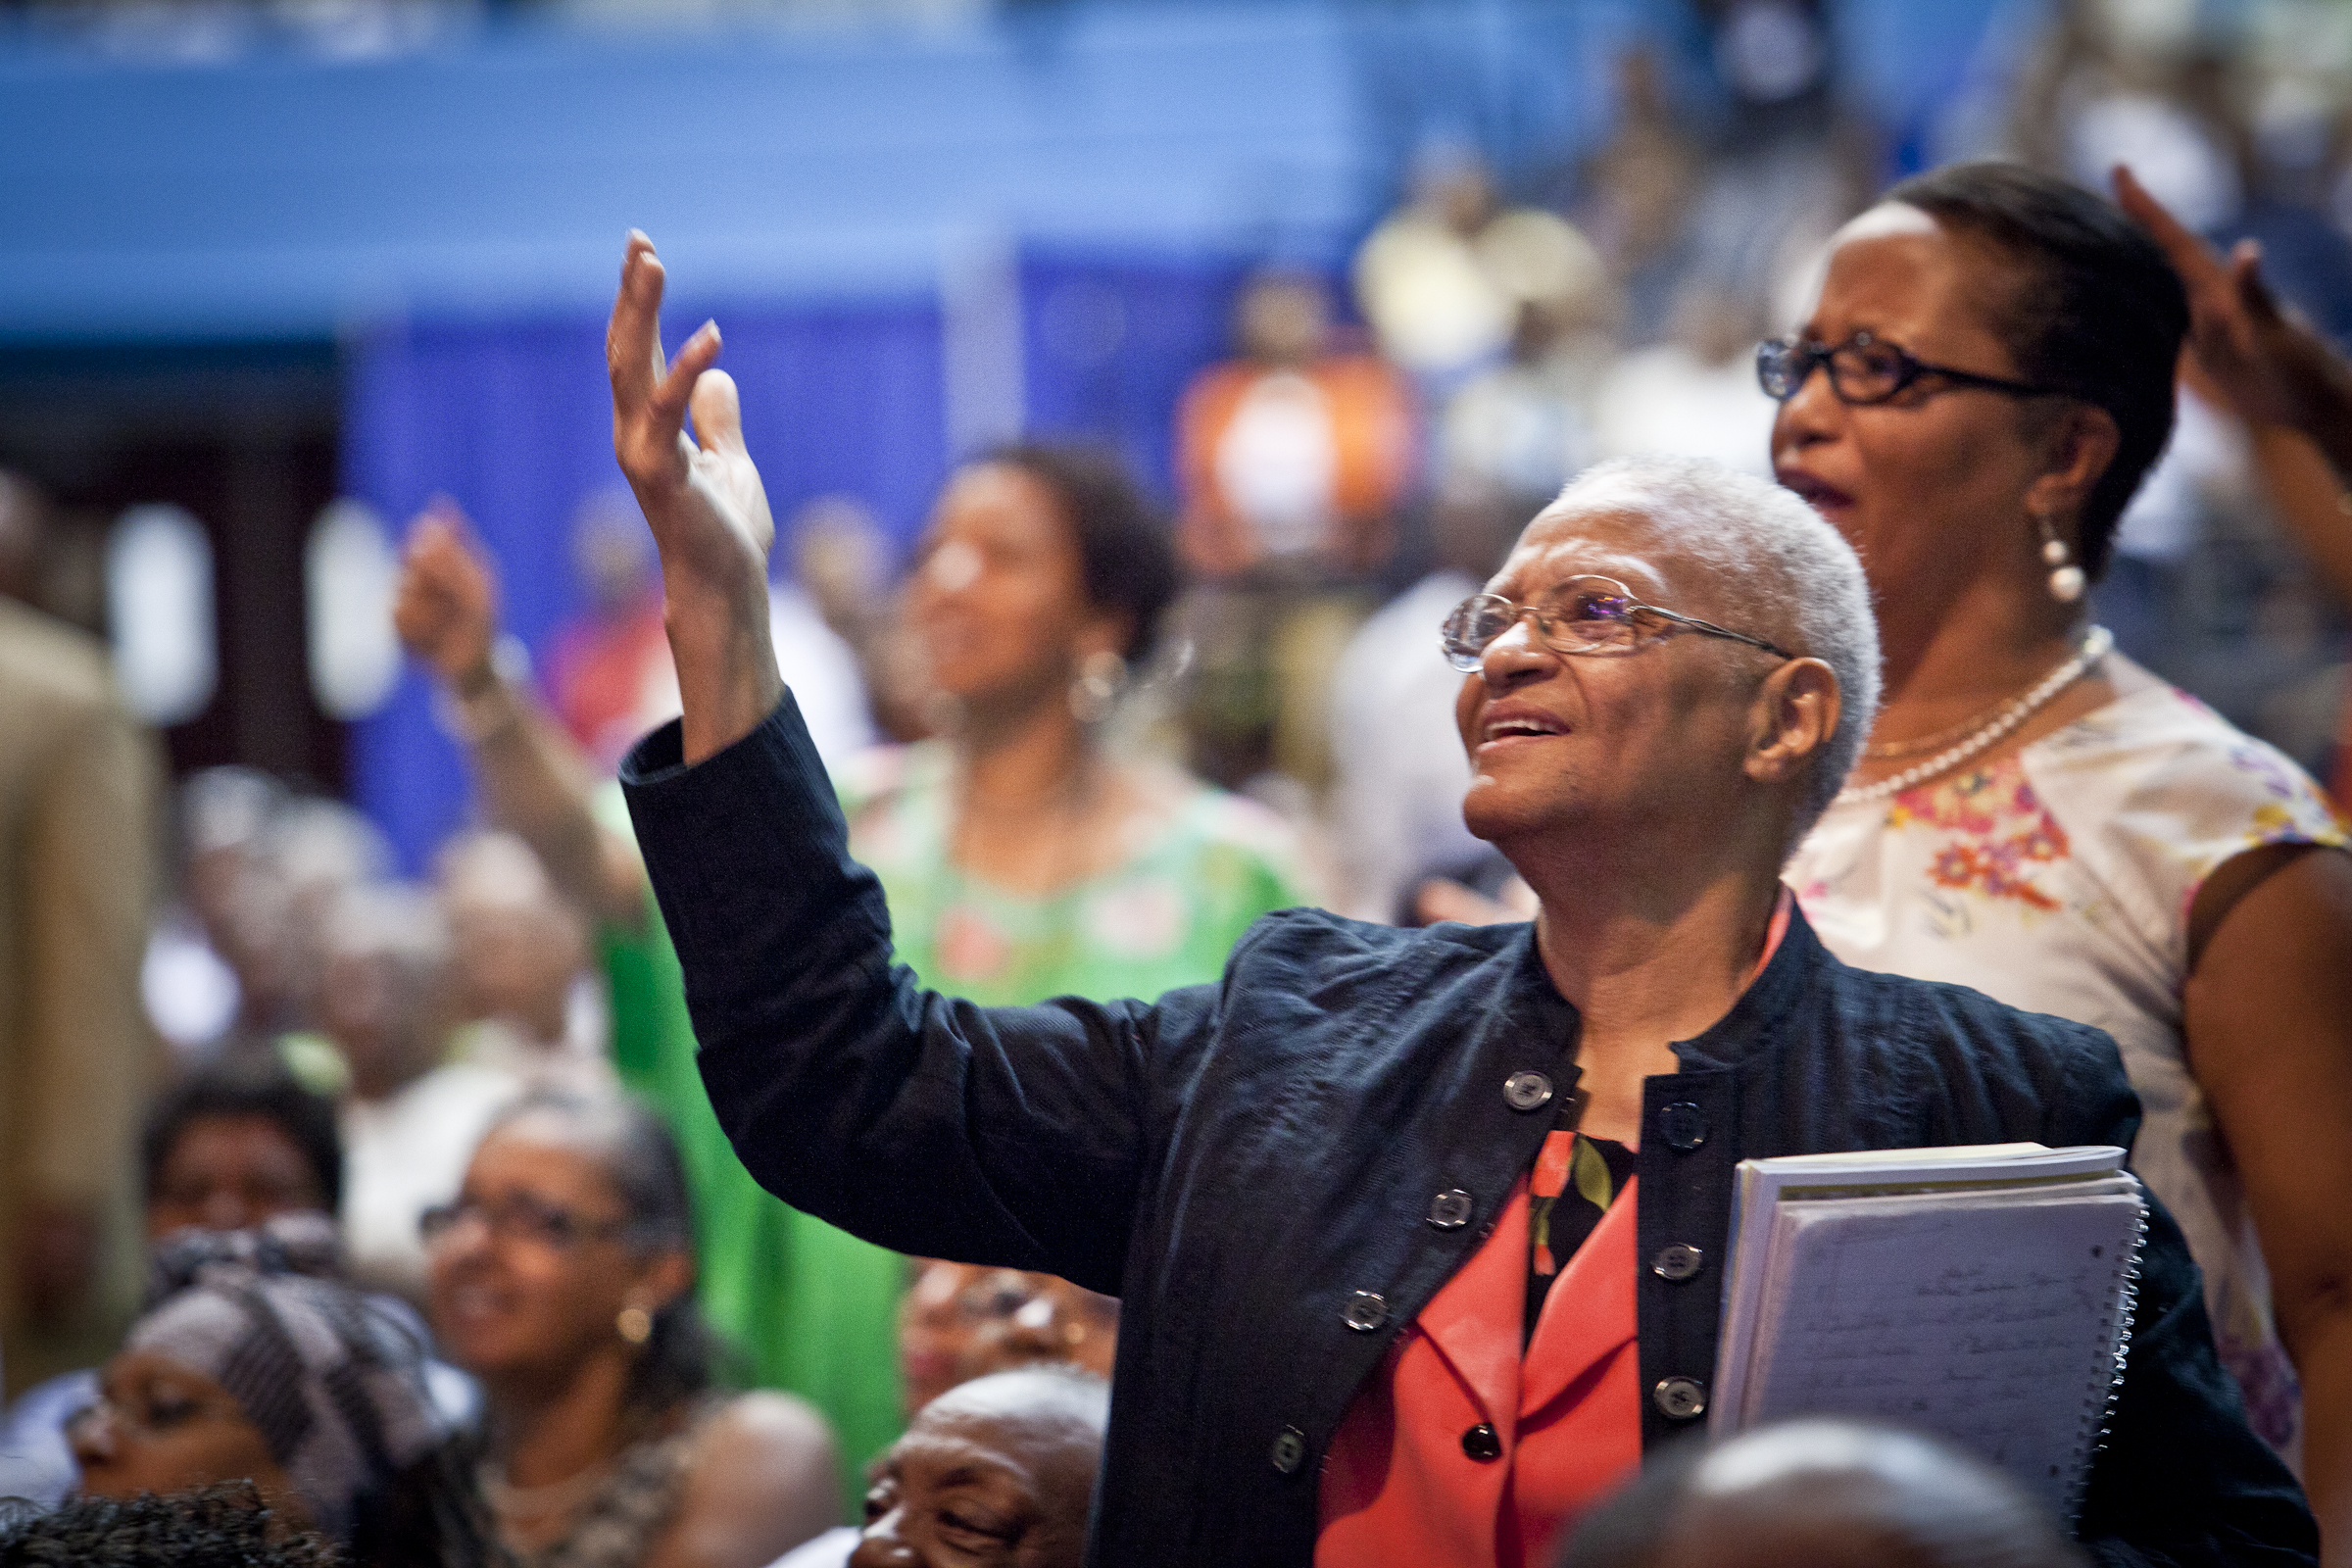 African American Woman hand raised in prayer | The DART Collective